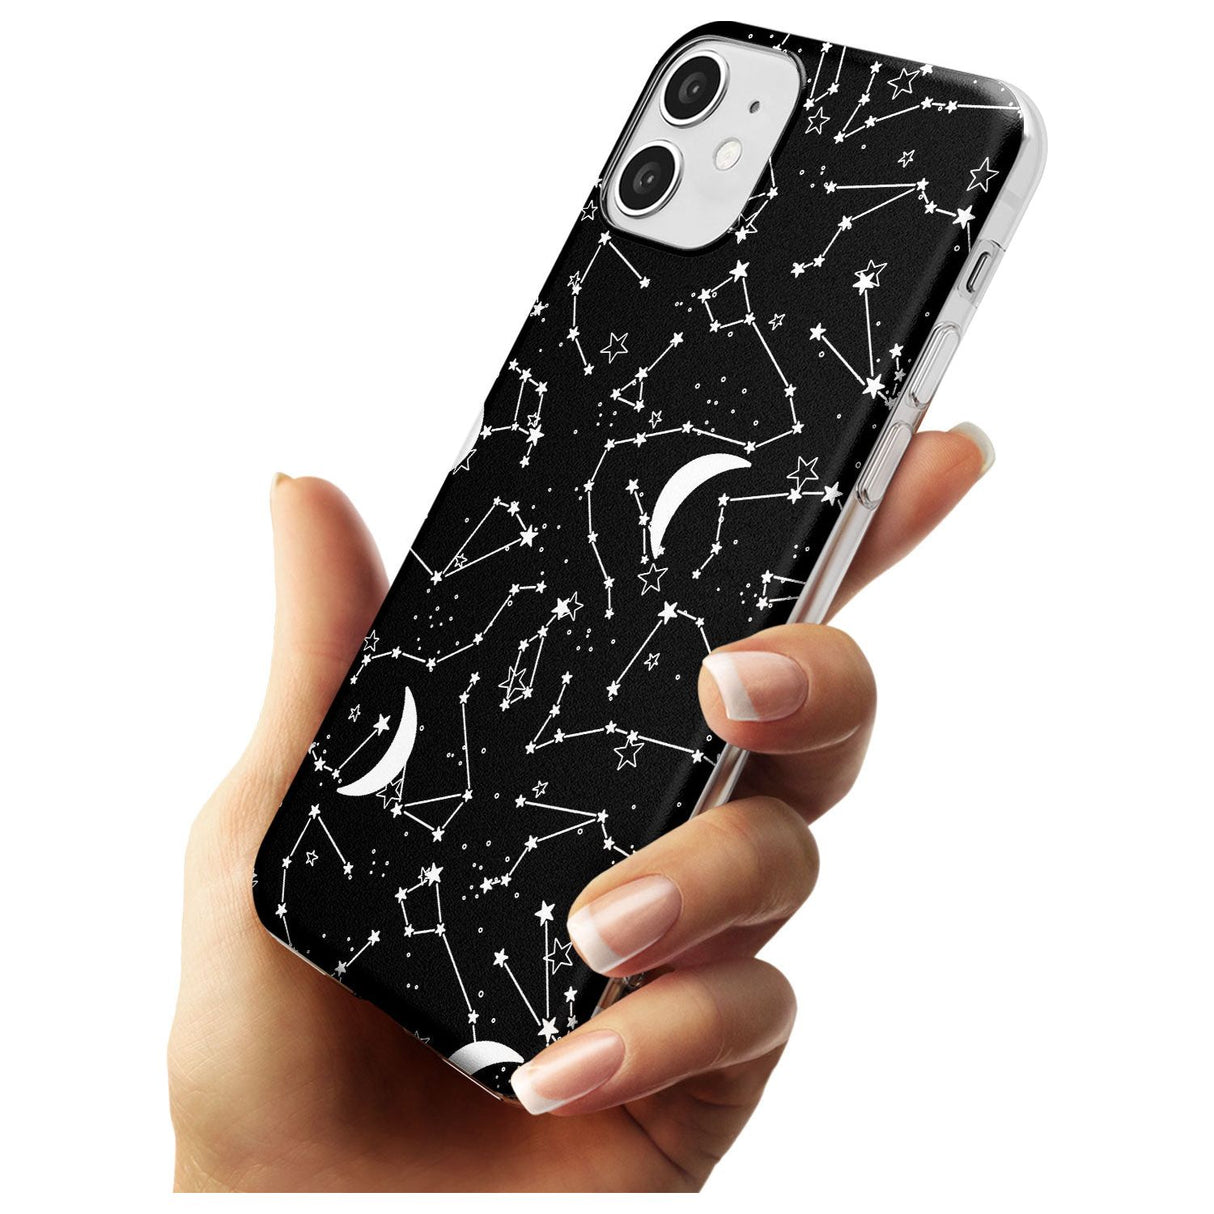 White Constellations on Black Black Impact Phone Case for iPhone 11